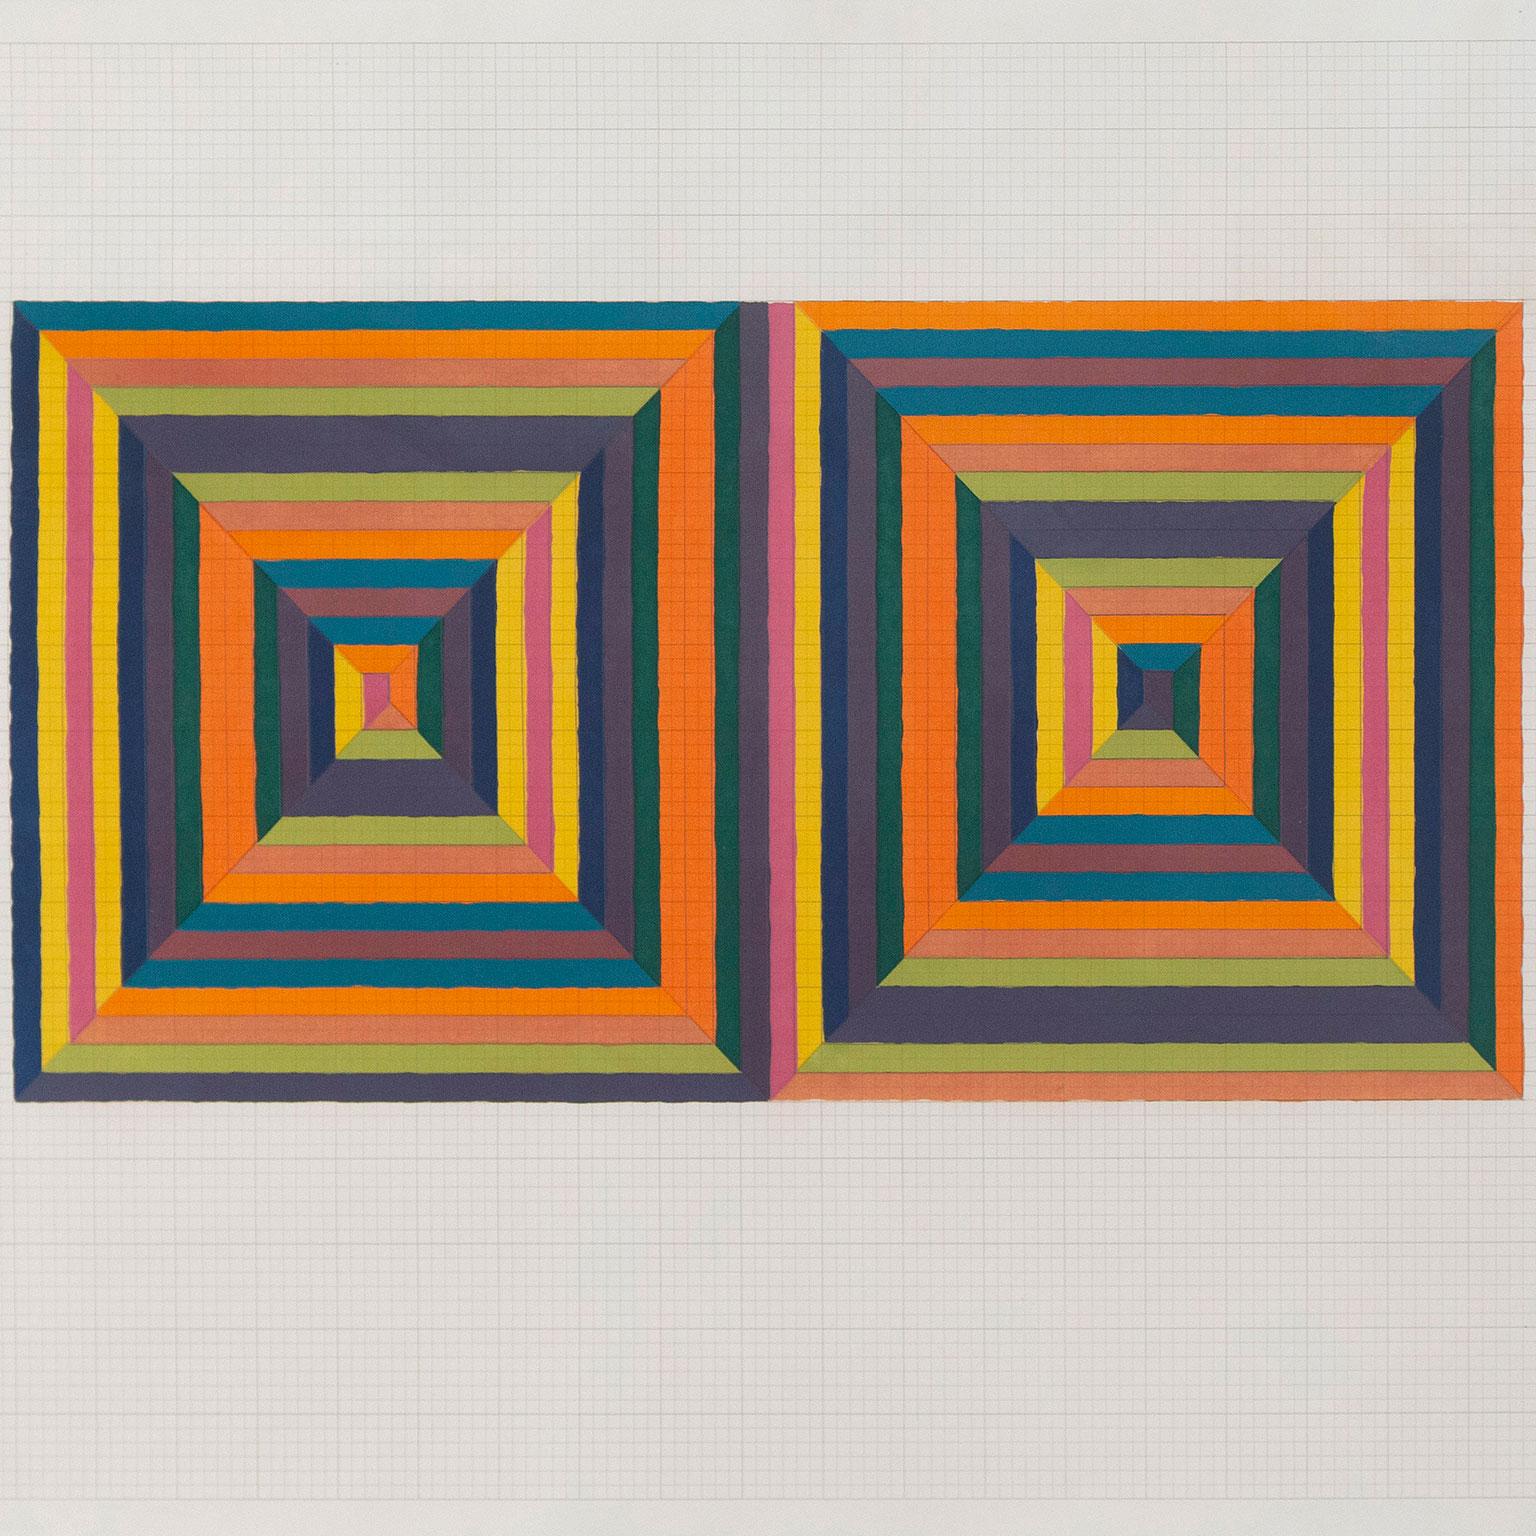 Fortin de las Flores - Abstract Geometric Print by Frank Stella